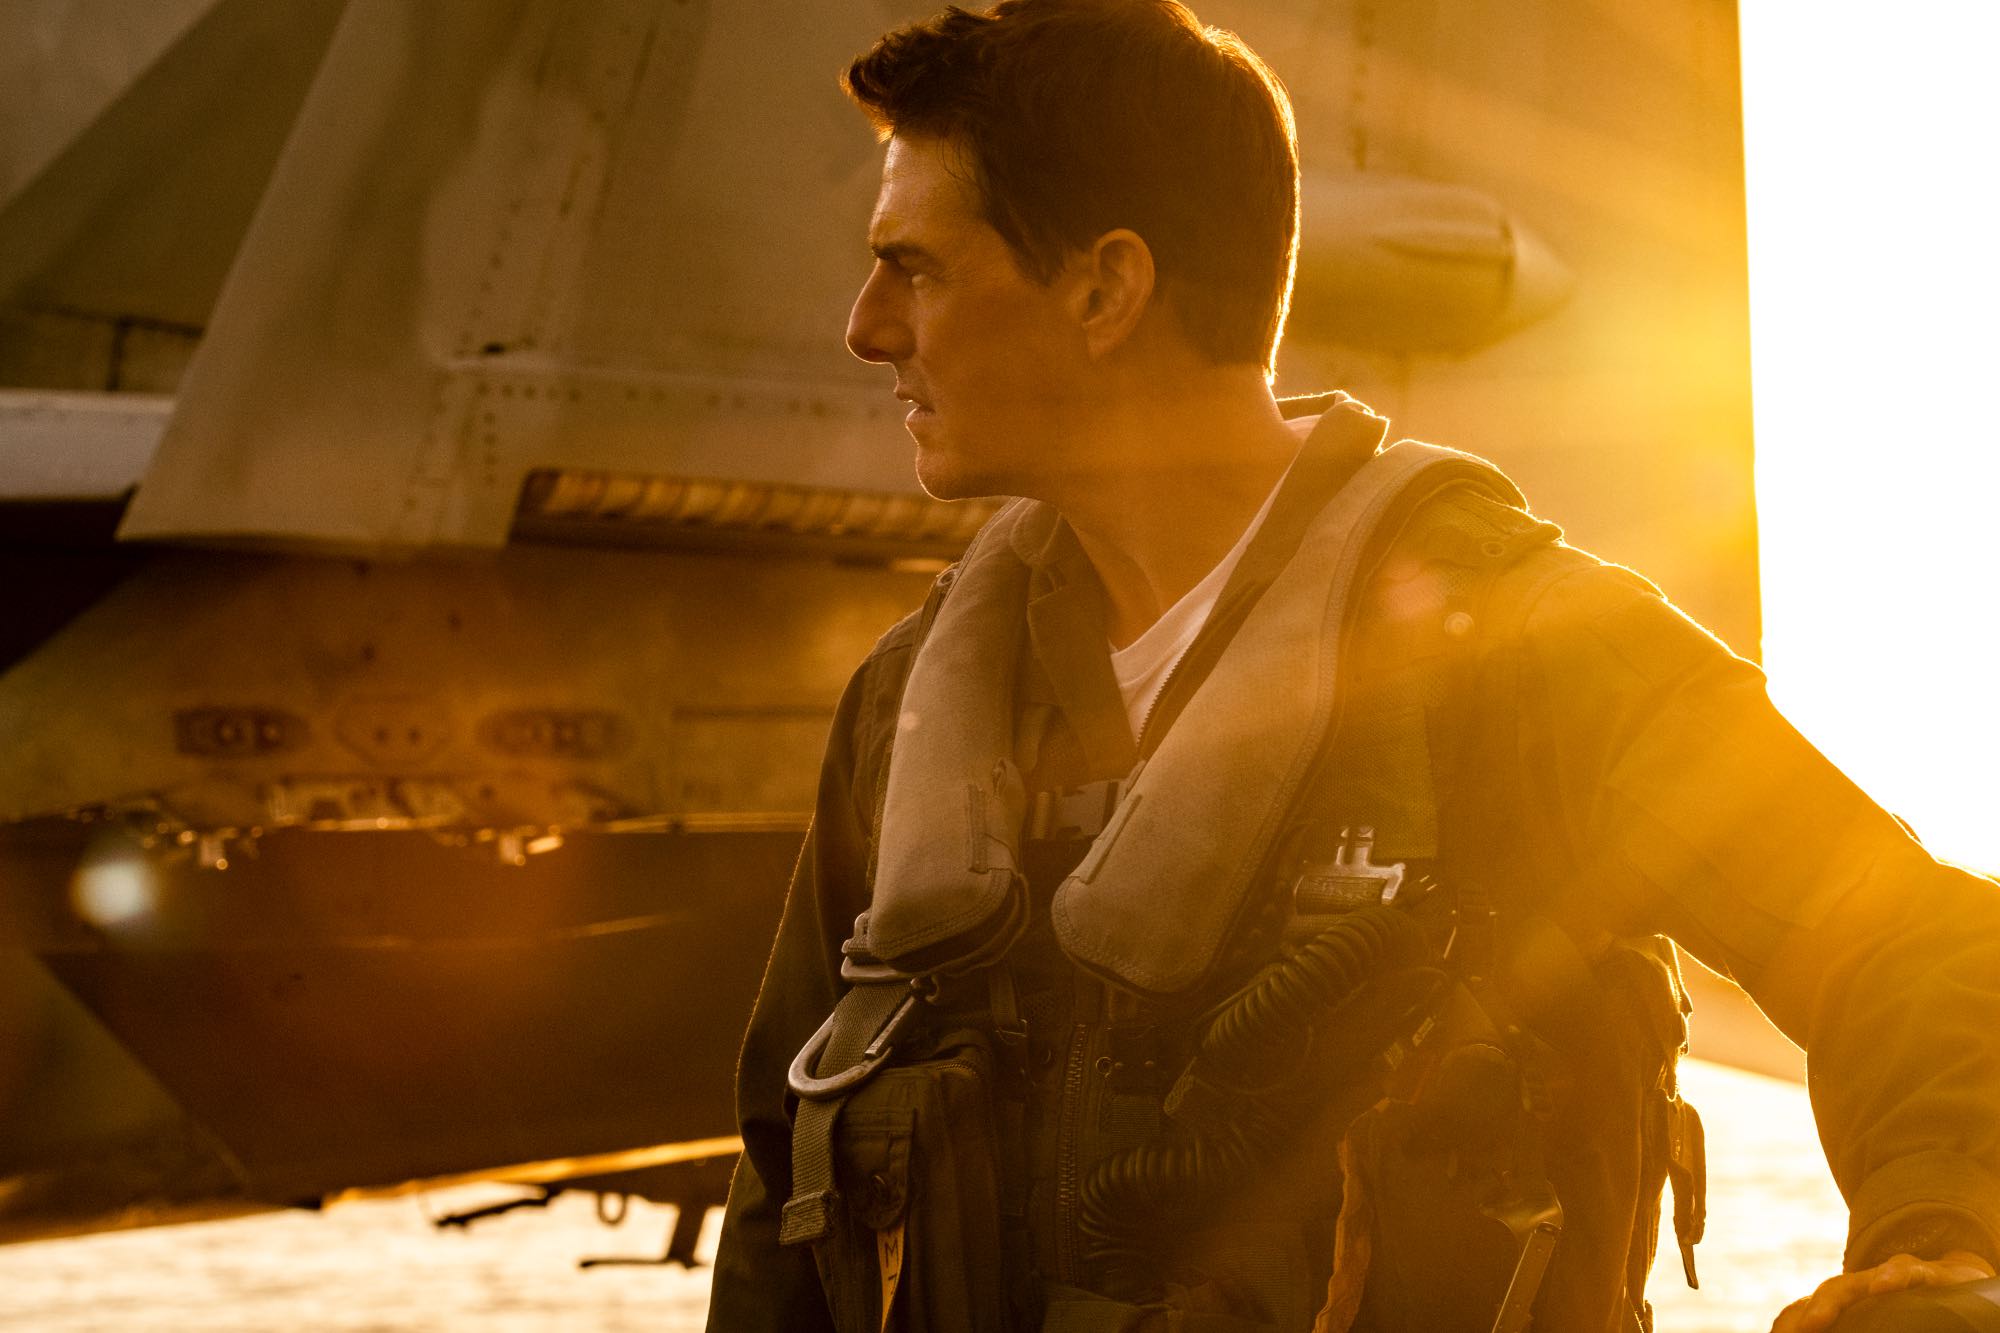 Oscars 2023 Best Picture nominee 'Top Gun: Maverick' Tom Cruise as Capt. Pete 'Maverick' Mitchell standing in front of a jet looking to the side, wearing his uniform